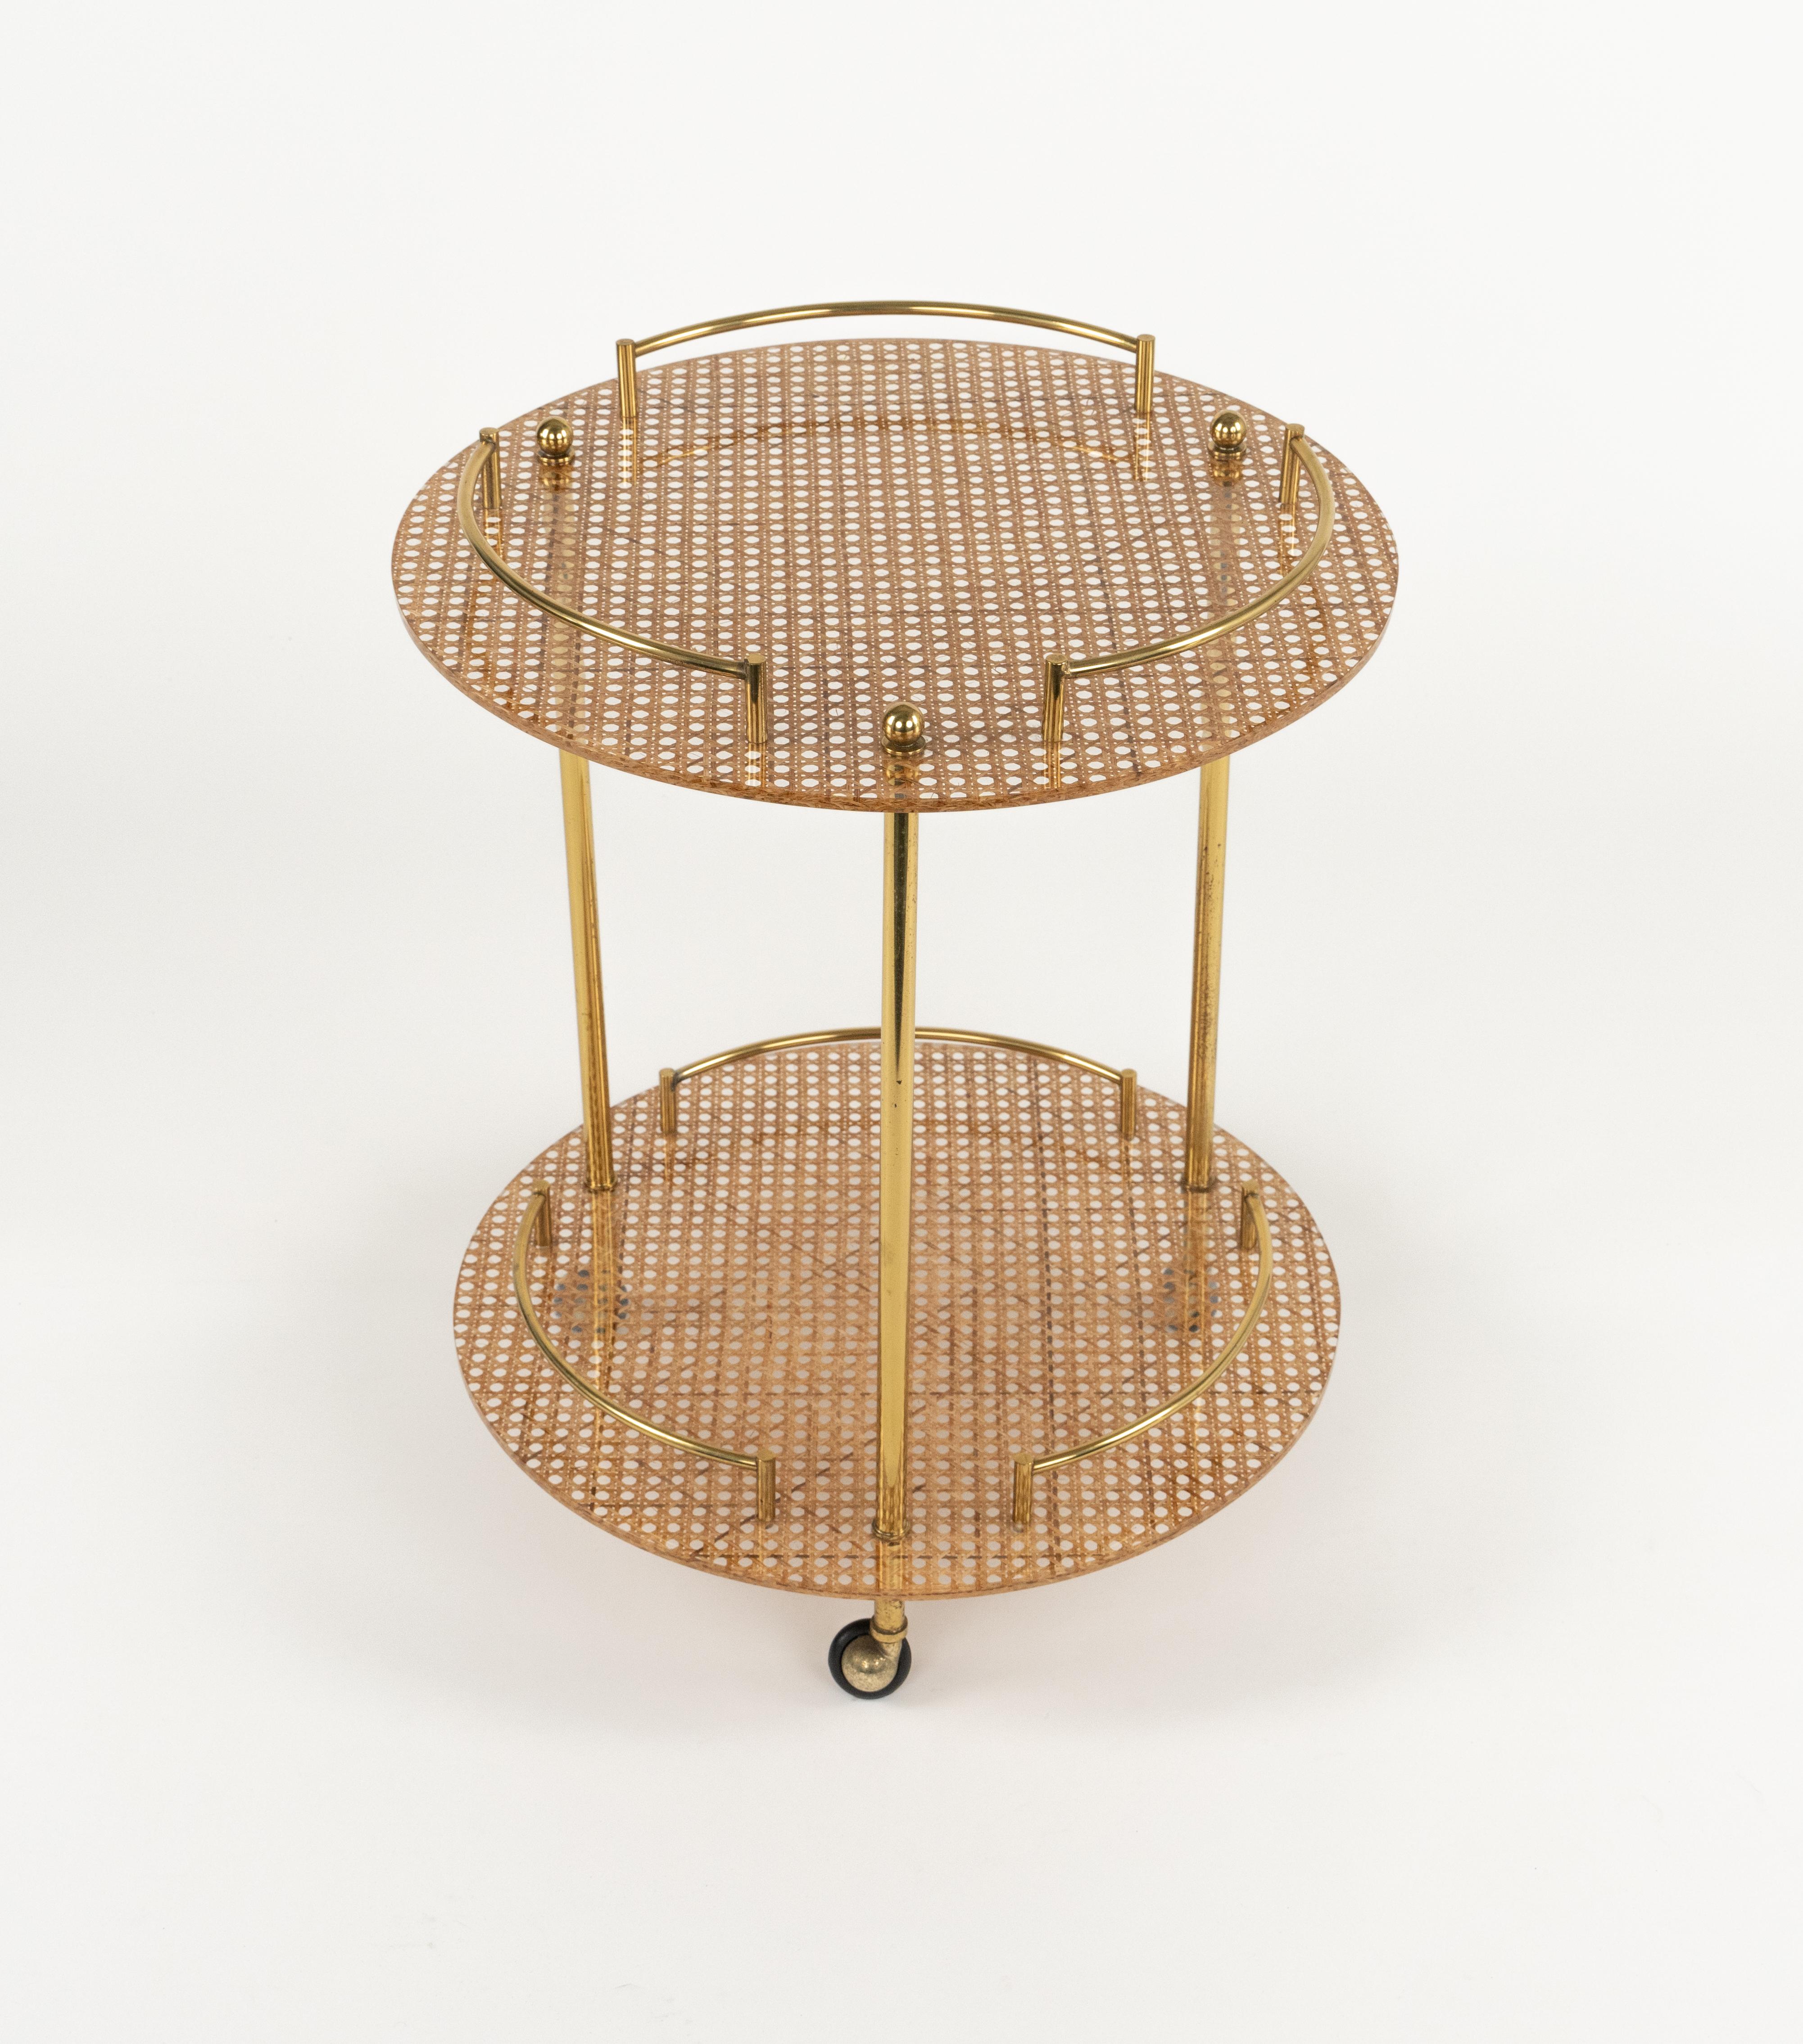 Mid-Century Modern Serving Bar Cart in Lucite, Brass and Rattan Christian Dior Style, Italy 1970s For Sale